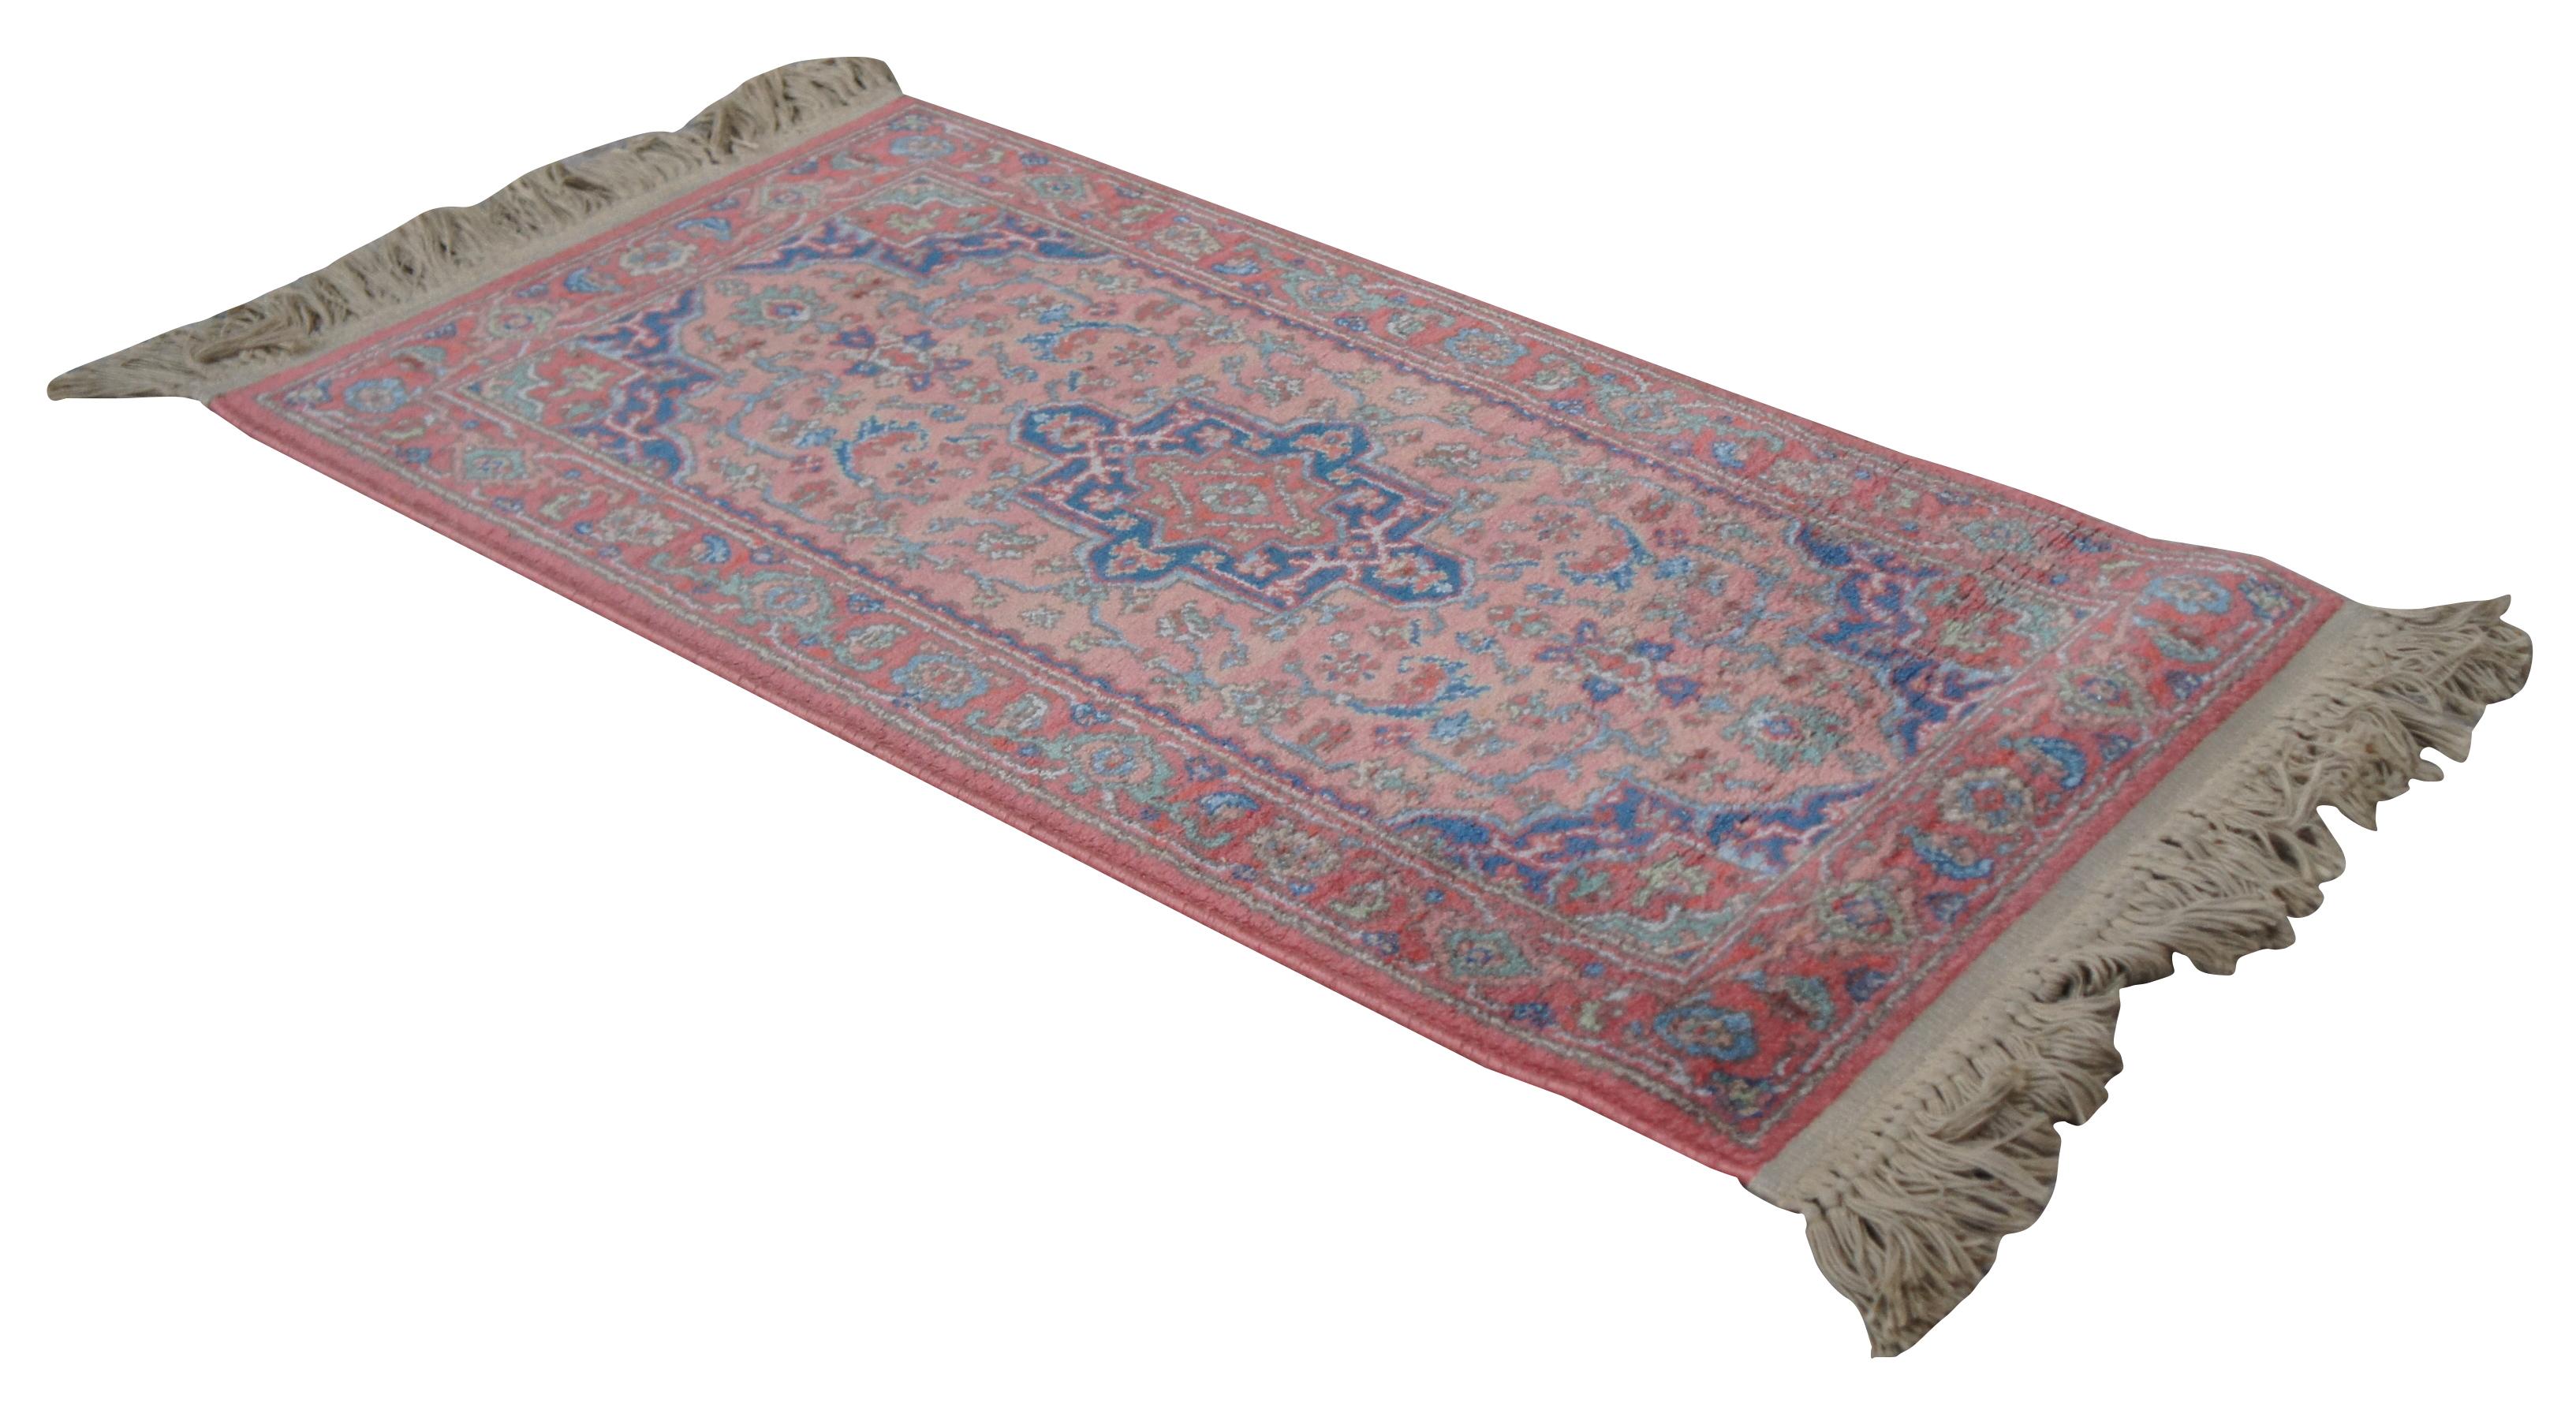 Karastan Design No. 736, Medallion Serapi. Made of 100% Wool with a pink background covered in shades of blue and pink. Measures: 2.2 x 4'.